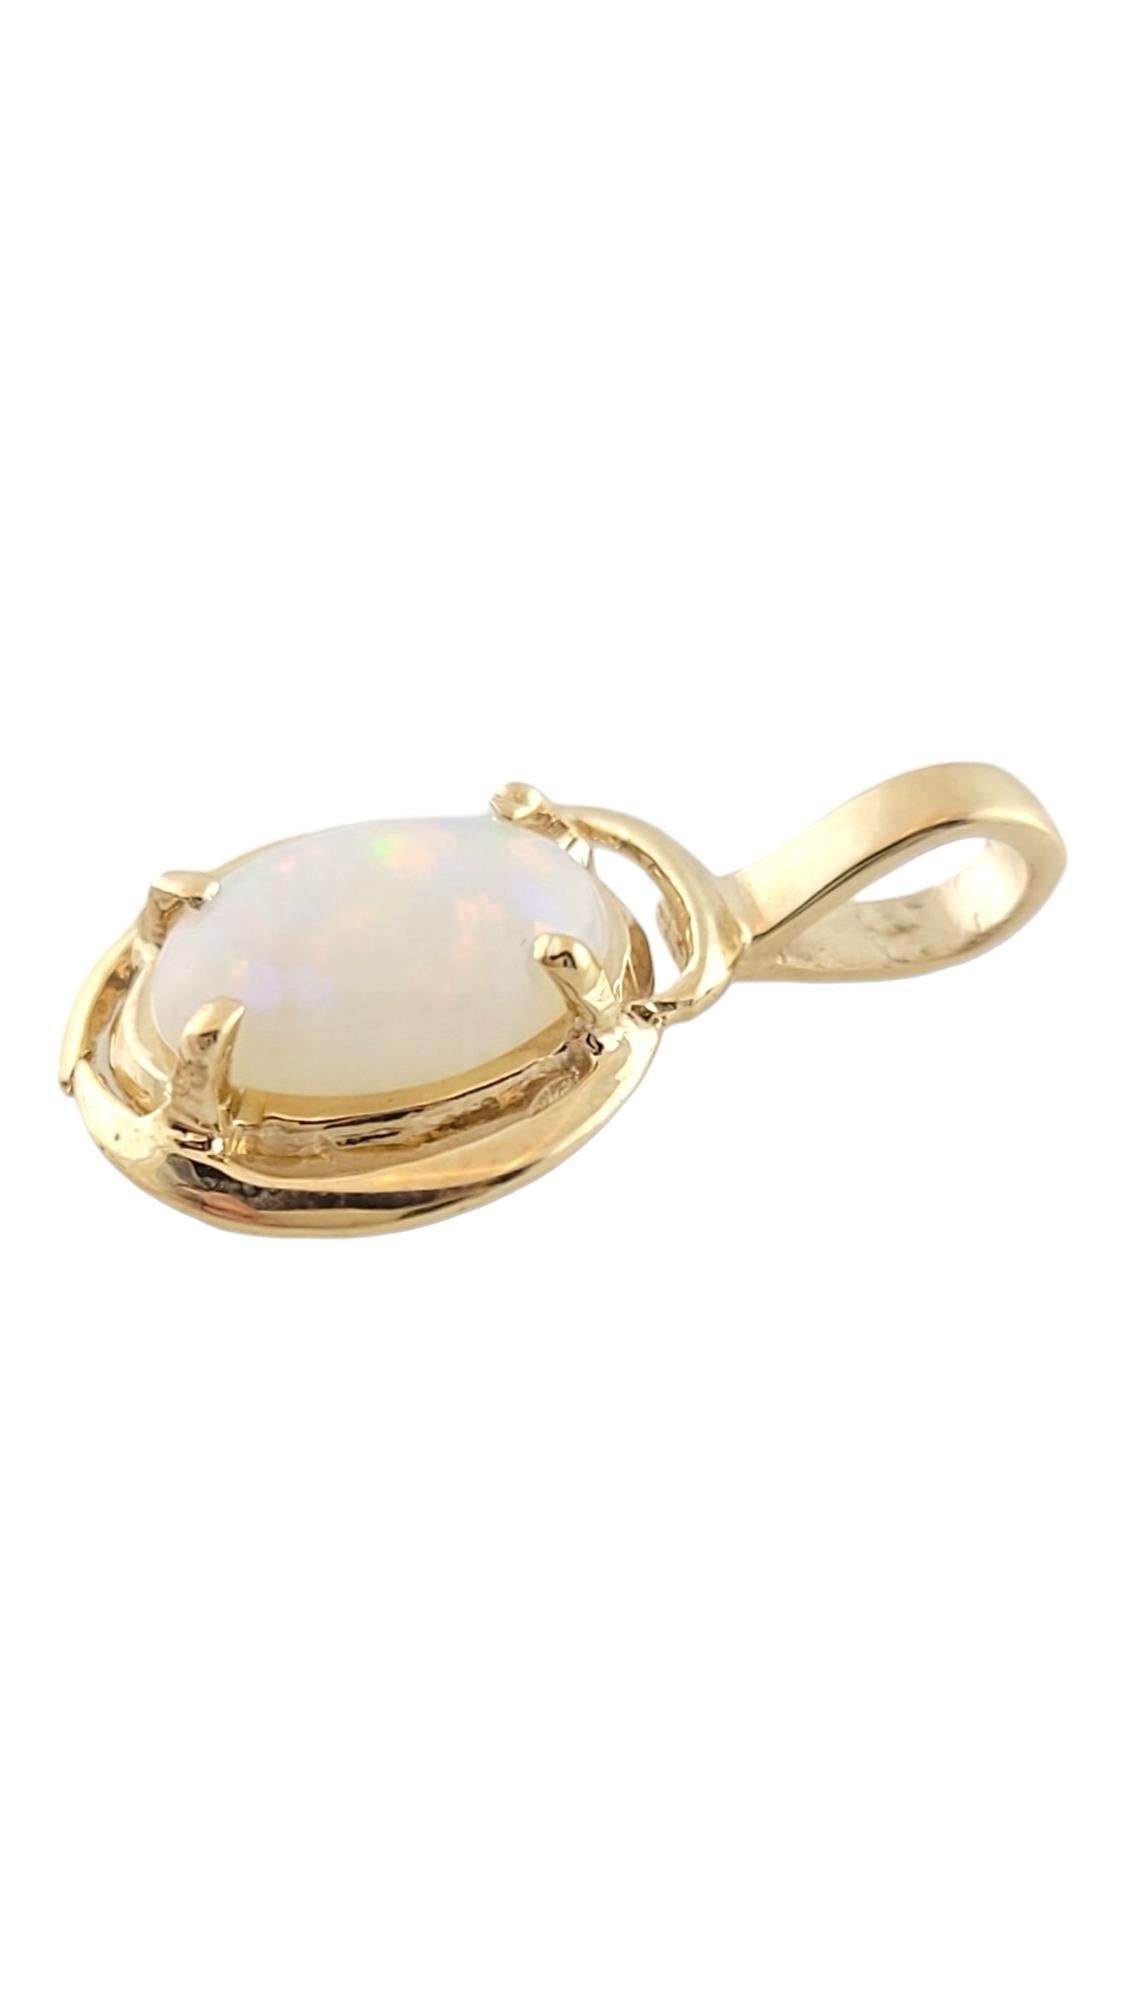 Vintage 10K Yellow Gold Opal Pendant #16174

This gorgeous pendant features a beautiful white opal stone set in 10K yellow gold!

Size: 17.9mm X 10.3mm X 3.0mm

Weight: 0.8 g/ 0.5 dwt

Hallmark: 415

Very good condition, professionally